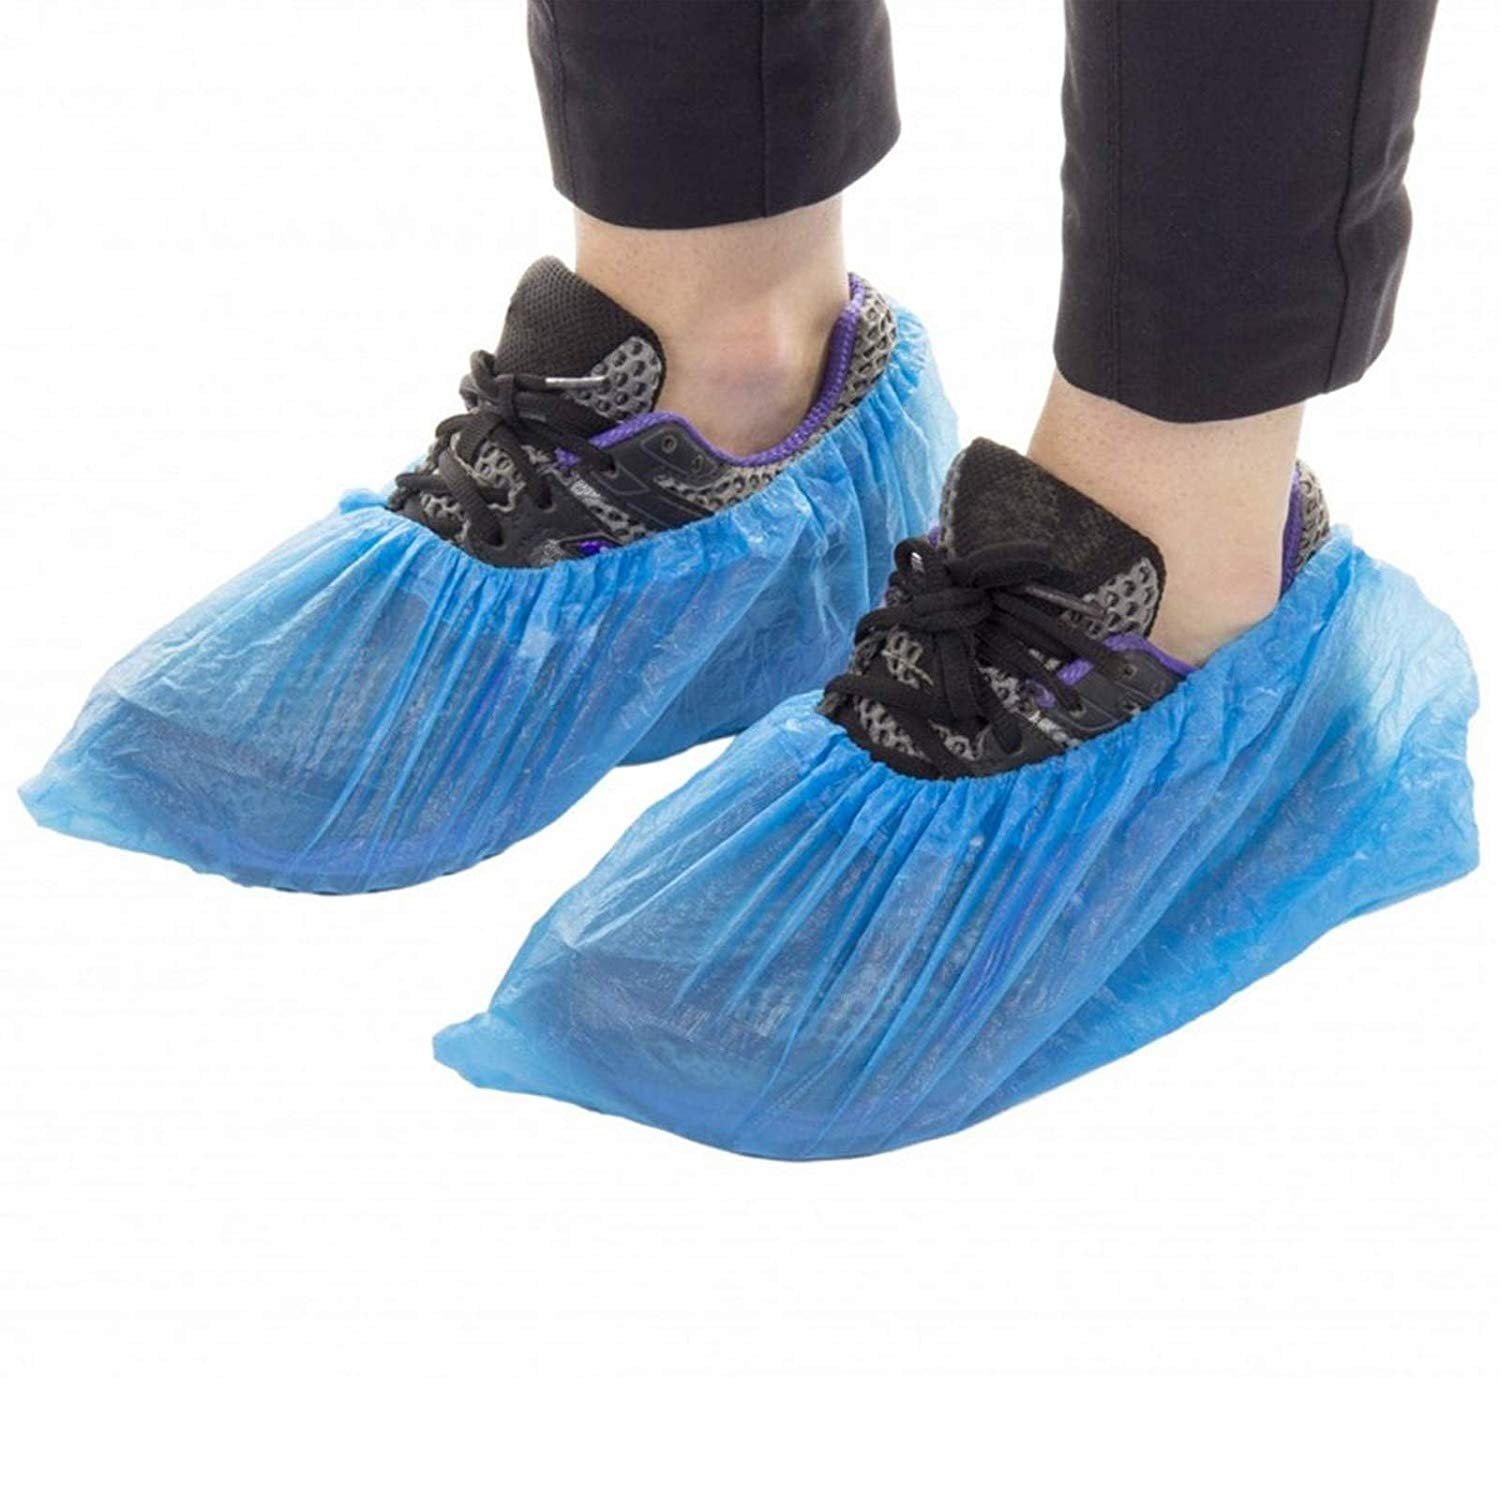 Rain proof Shoe Covers Portable Protection Outdoor Lightweight Durable 